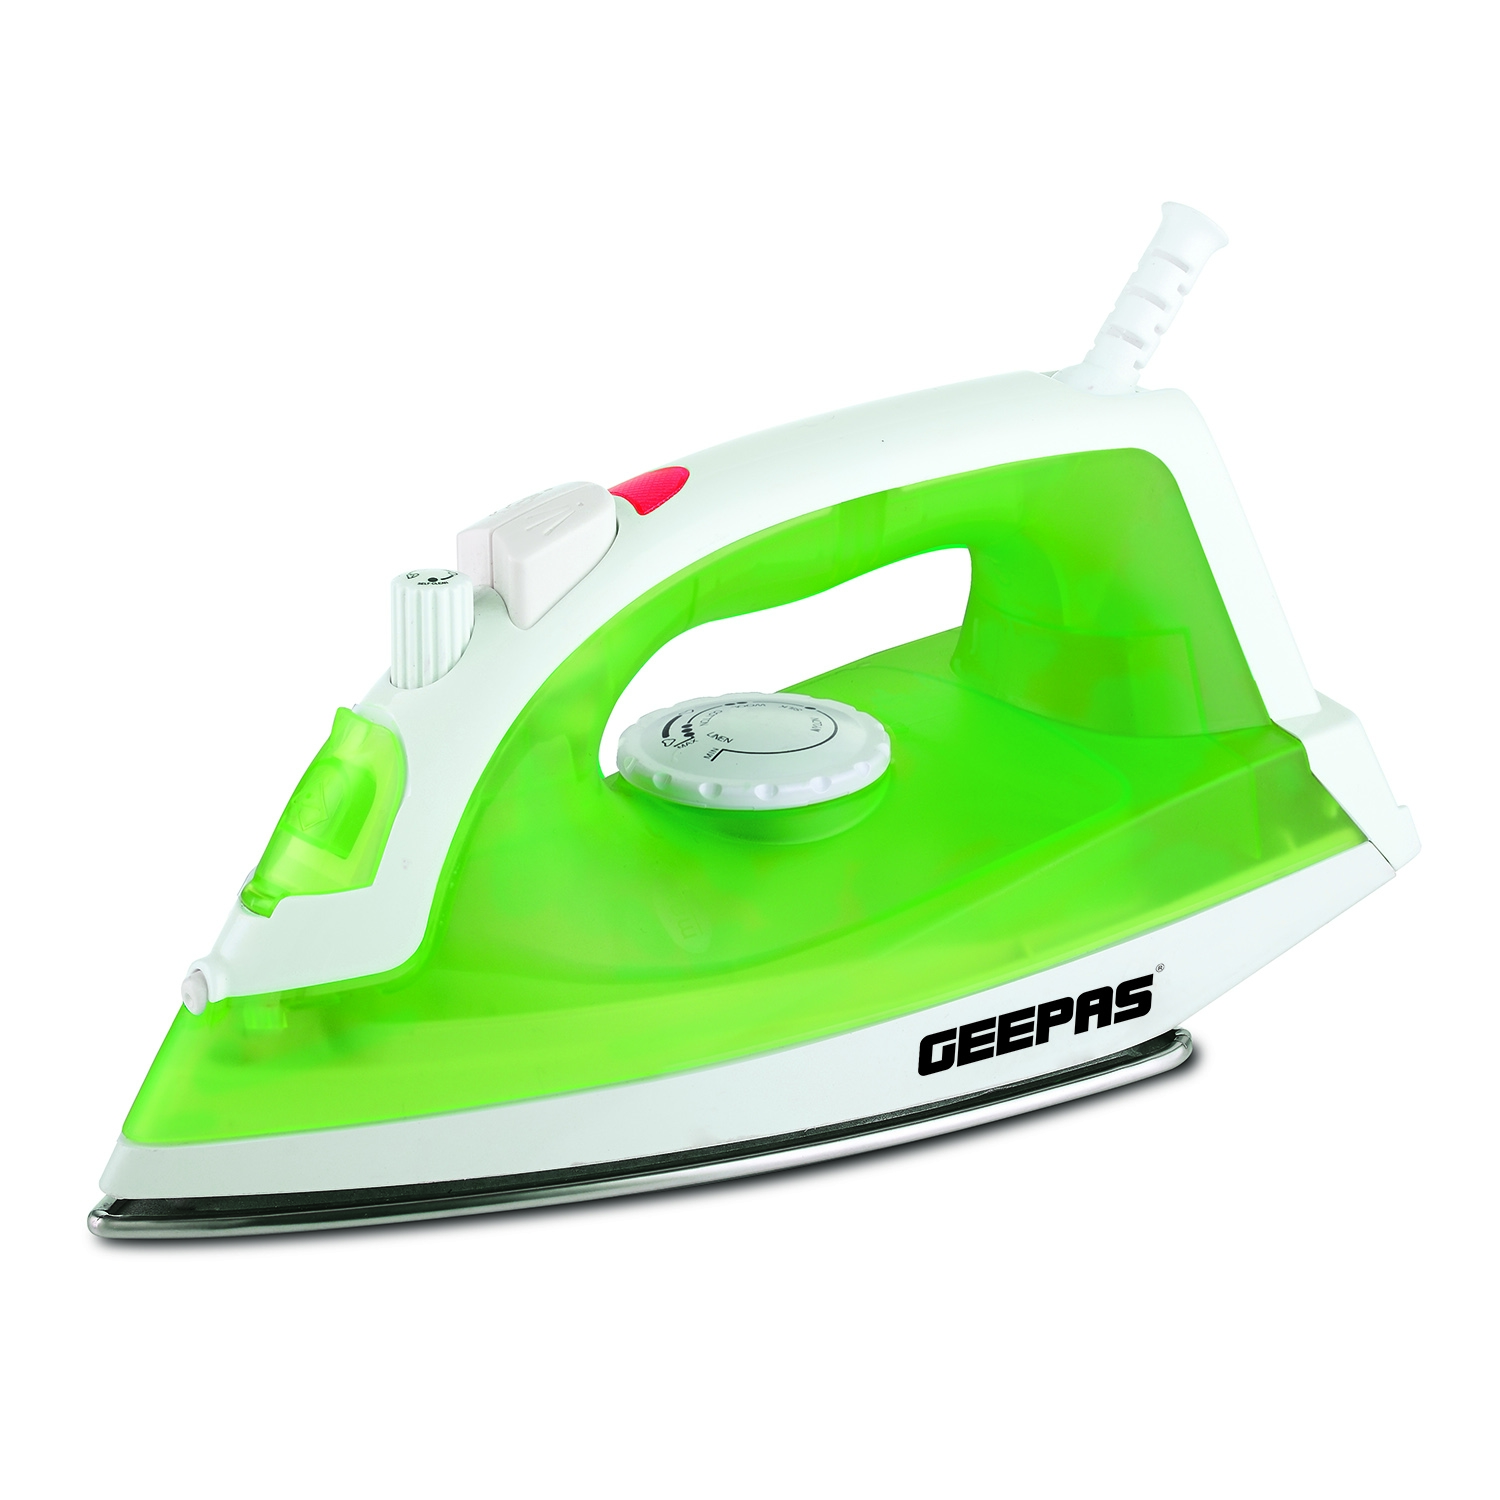 Geepas GSI7783 1600W Multi-functional Steam Iron - Crisp Ironed Clothes | Non-Stick Sole-plate, Wet/Dry Function & with Temperature Control- Dry/Steam Burst/Vertical Steam/Spray Function | 2 Years War